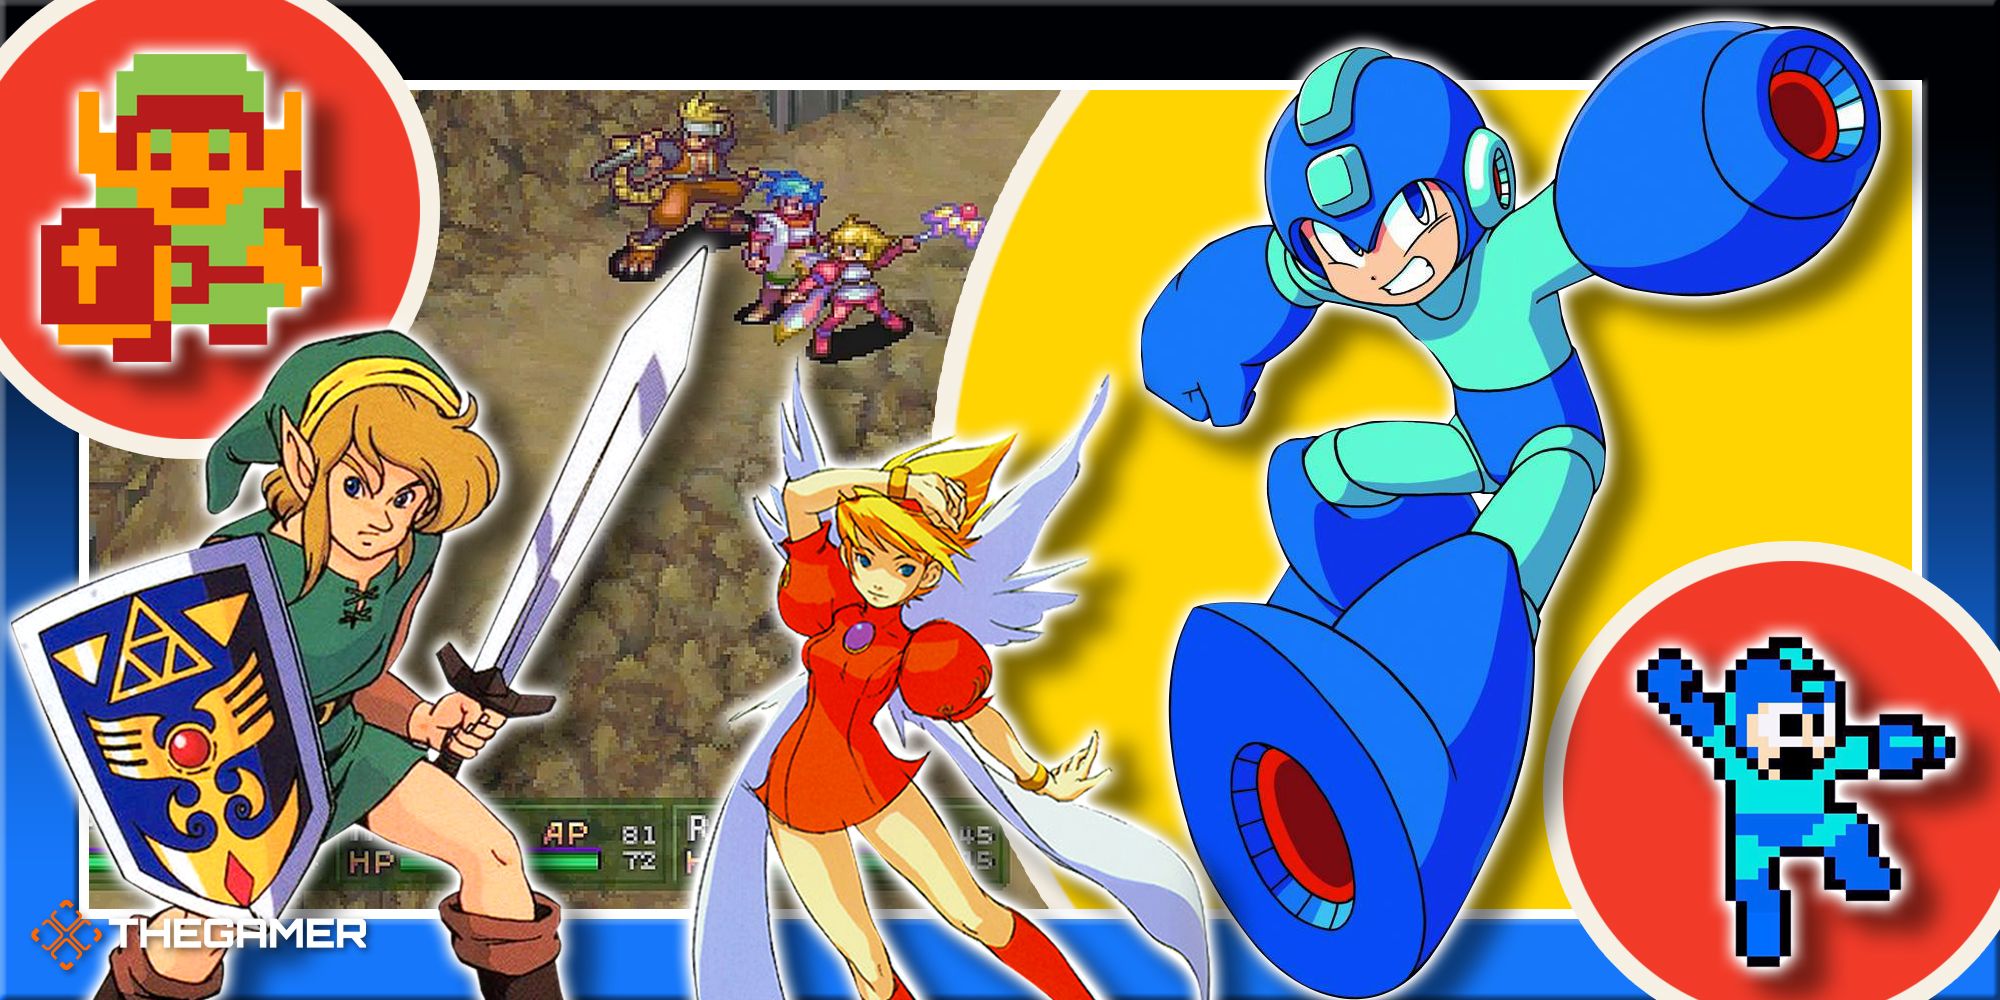 Game art and screen shot from he Legend Of Zelda, Mega Man and Breath Of Fire III